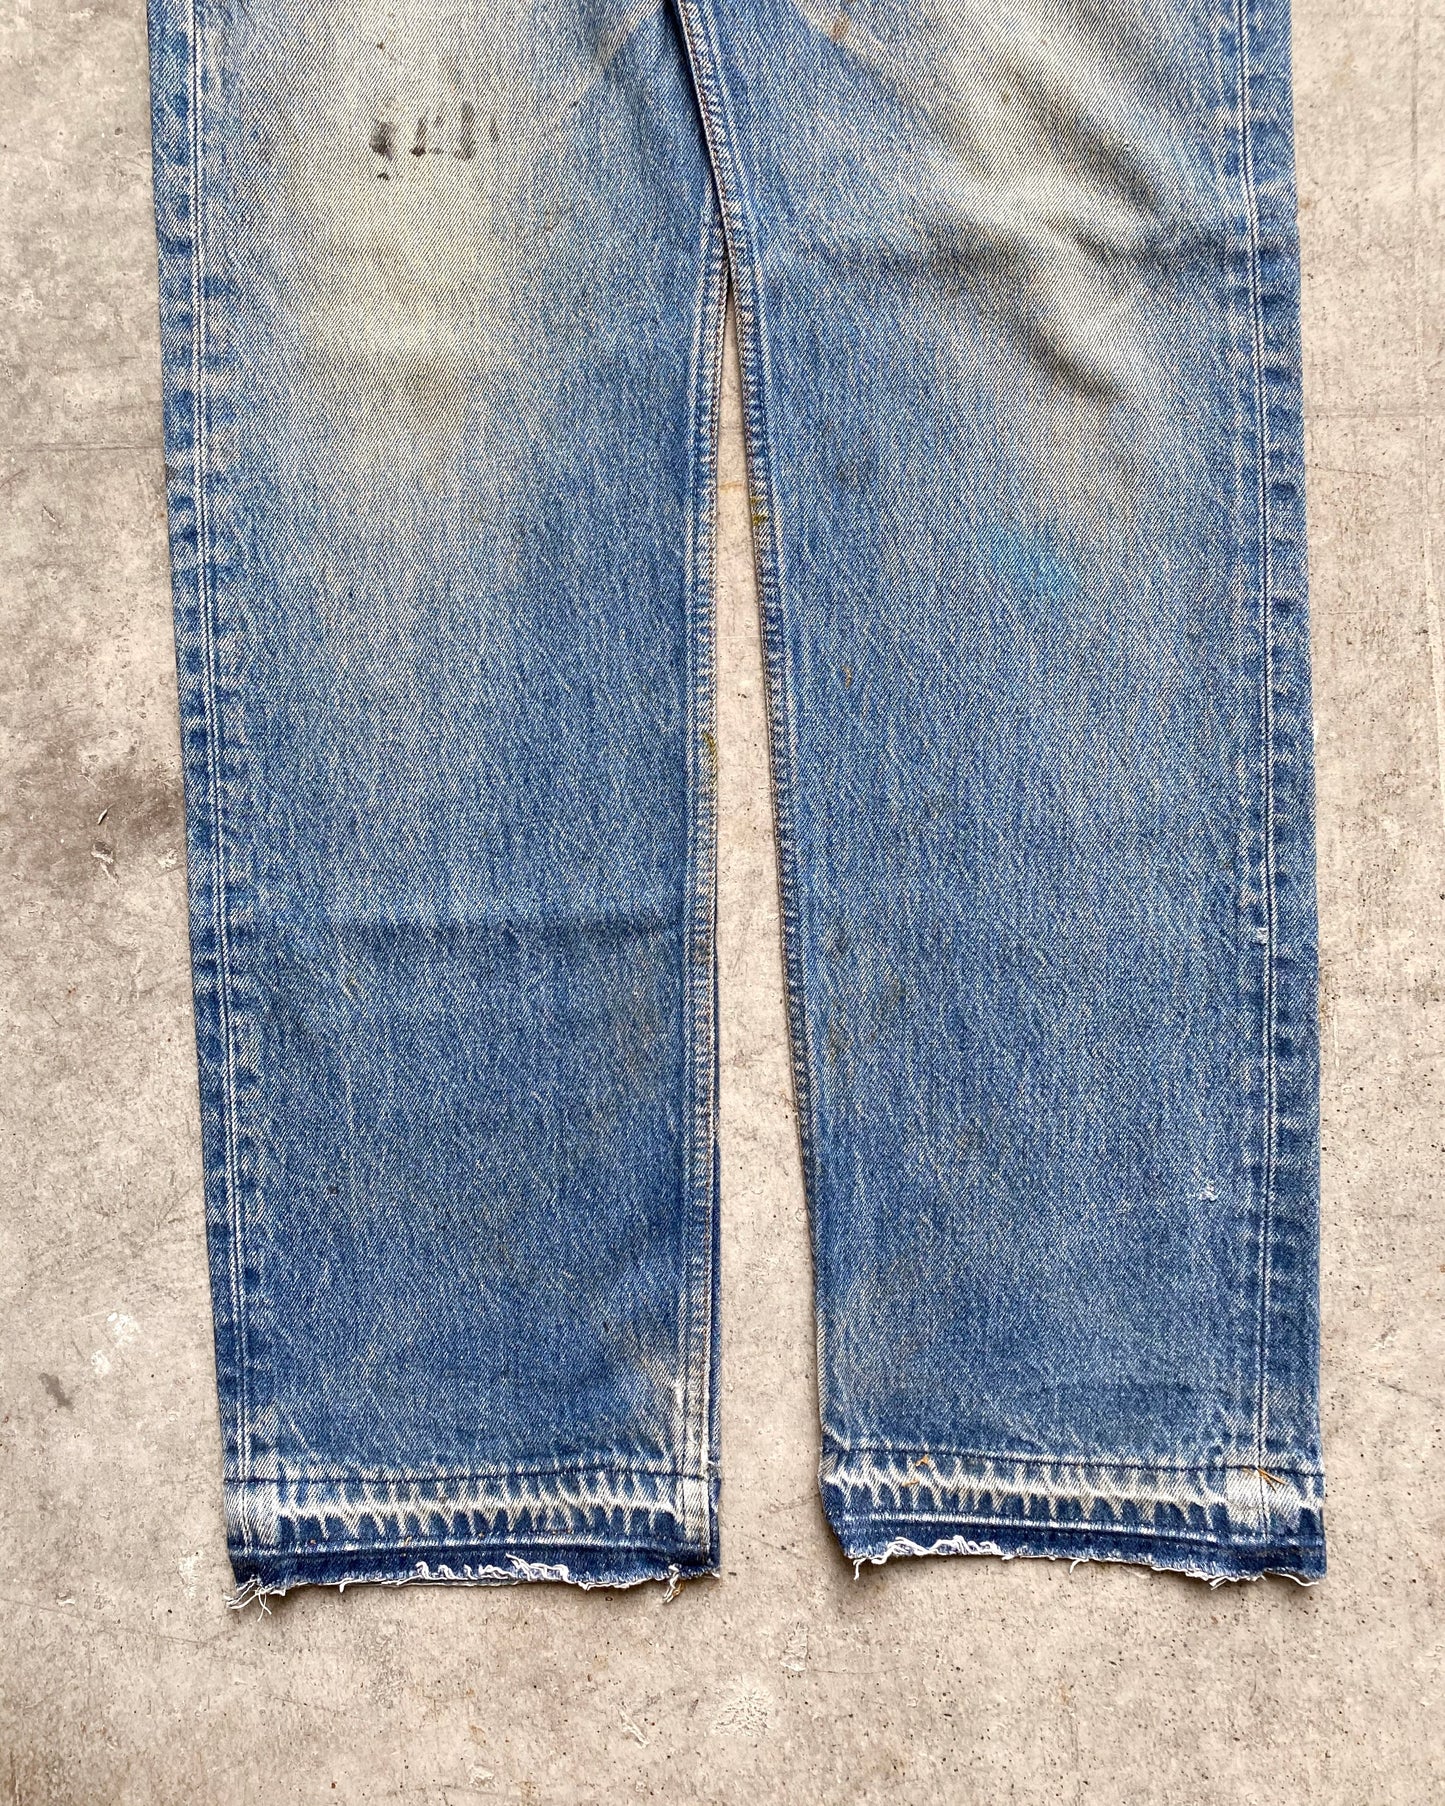 1990S PAINTED LEVI'S 501 RELEASED HEM JEANS (34X34)